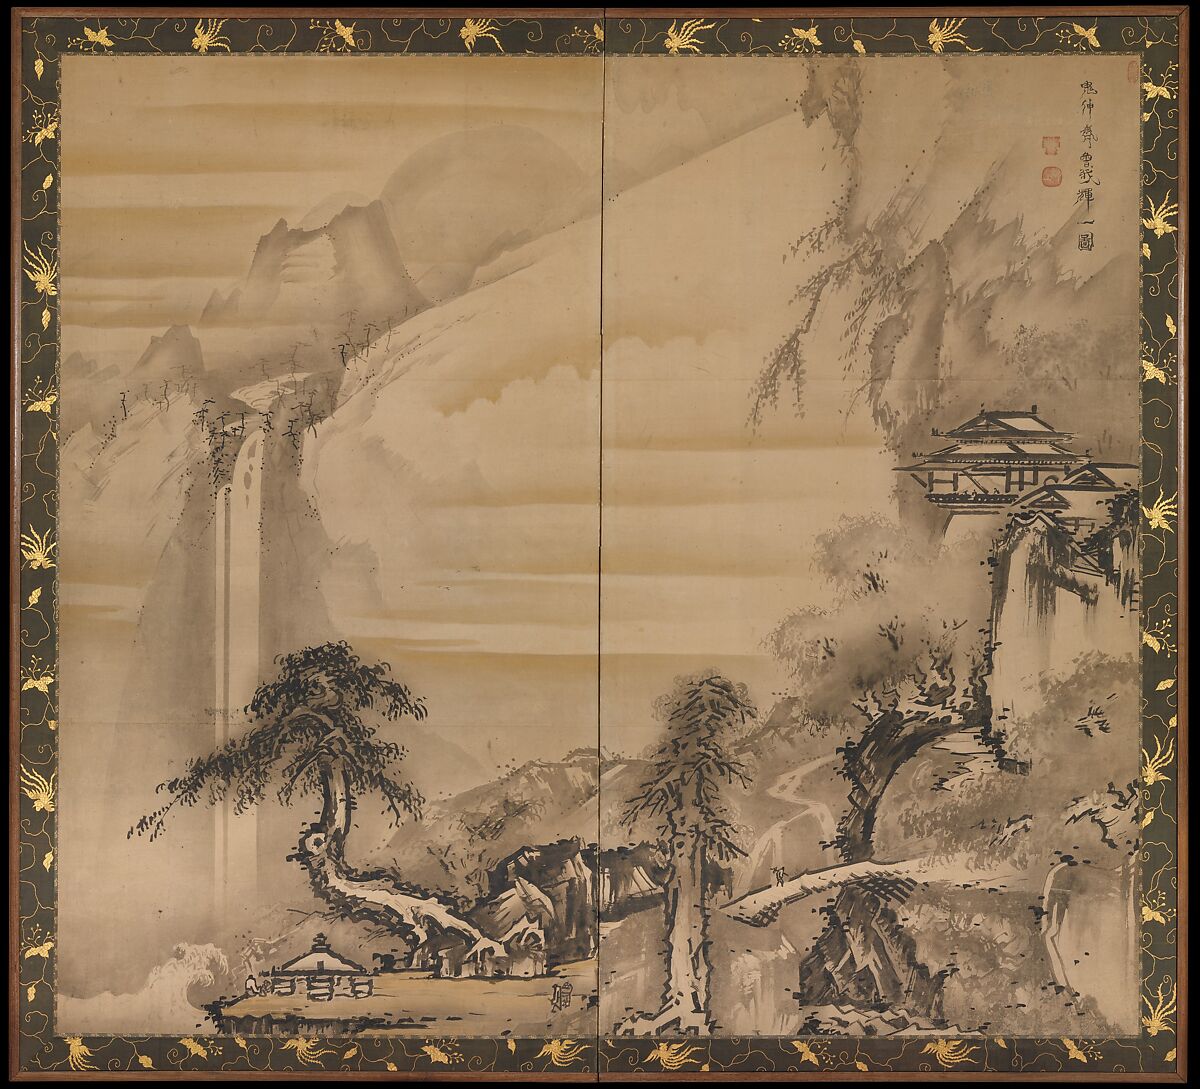 Chinese Scholar Contemplating a Waterfall, Follower of Soga Shōhaku (Japanese, 1730–1781), Two-panel folding screen; ink and gold on paper, Japan 